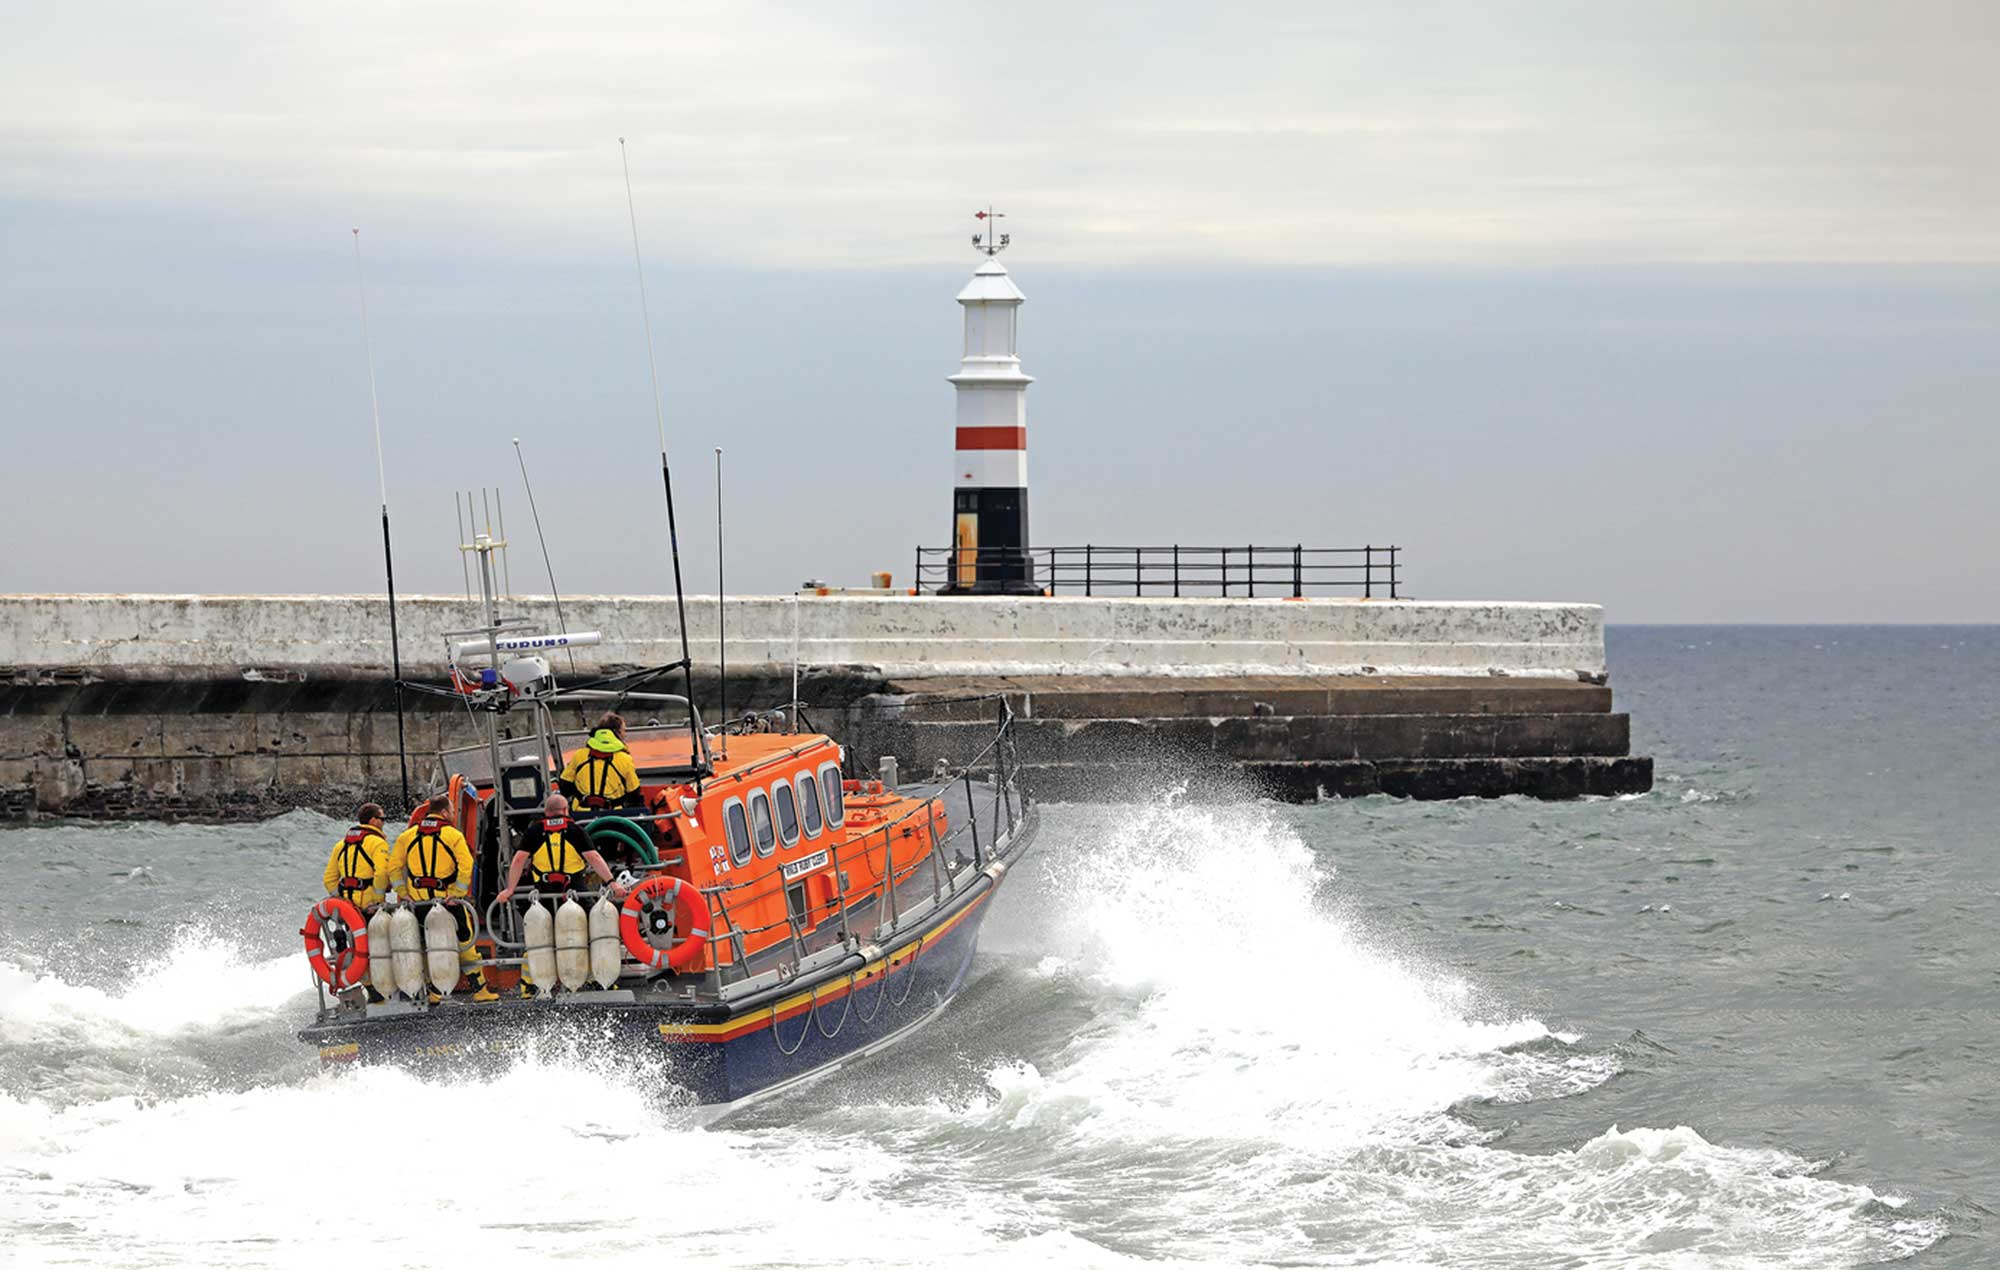 A fully-crewed RNLI lifeboat launching off the coast of Ramsey, Isle of Man